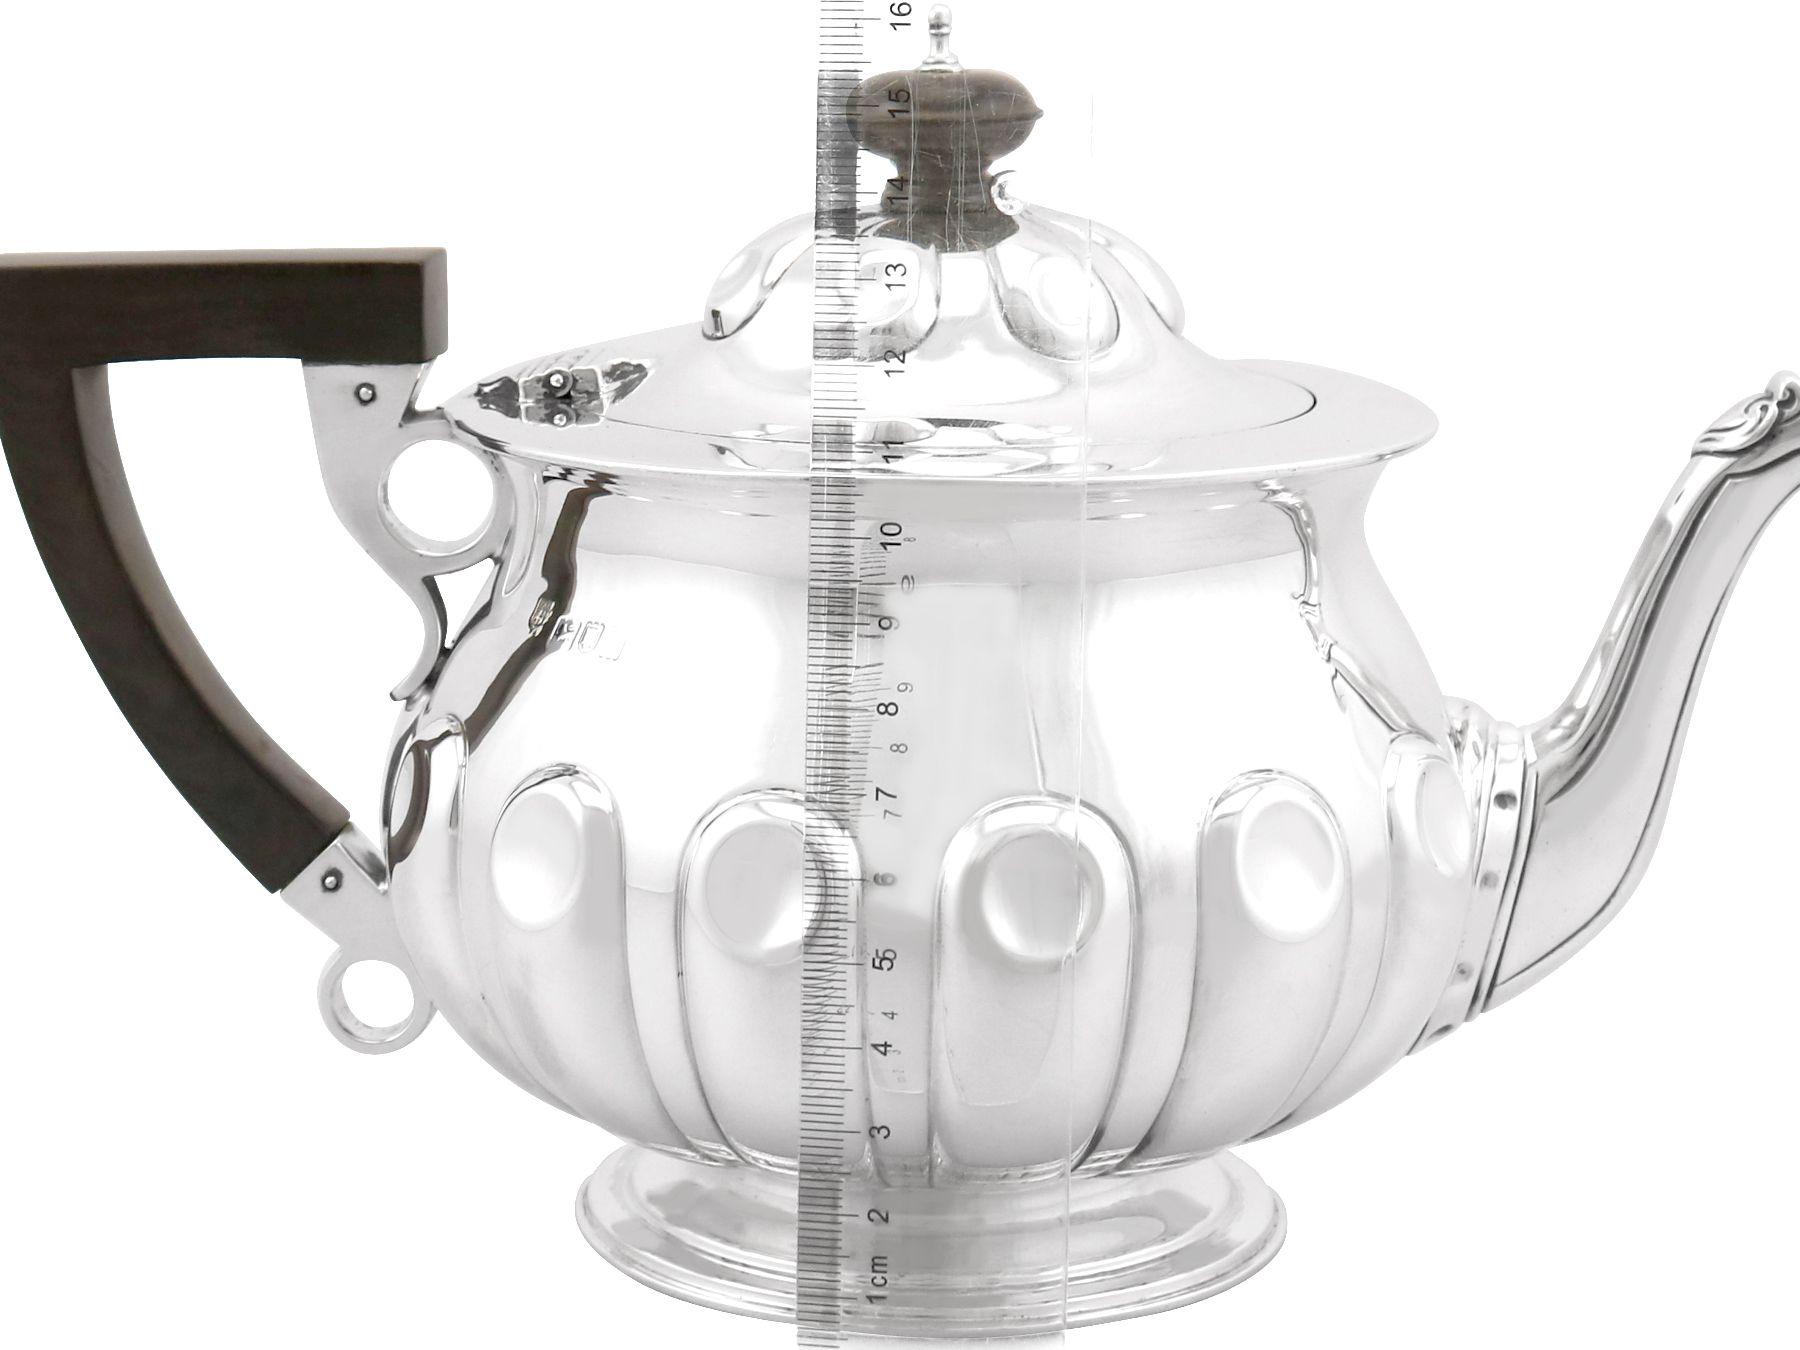 Reid & Sons Antique Edwardian Arts & Crafts Style Sterling Silver Teapot For Sale 1